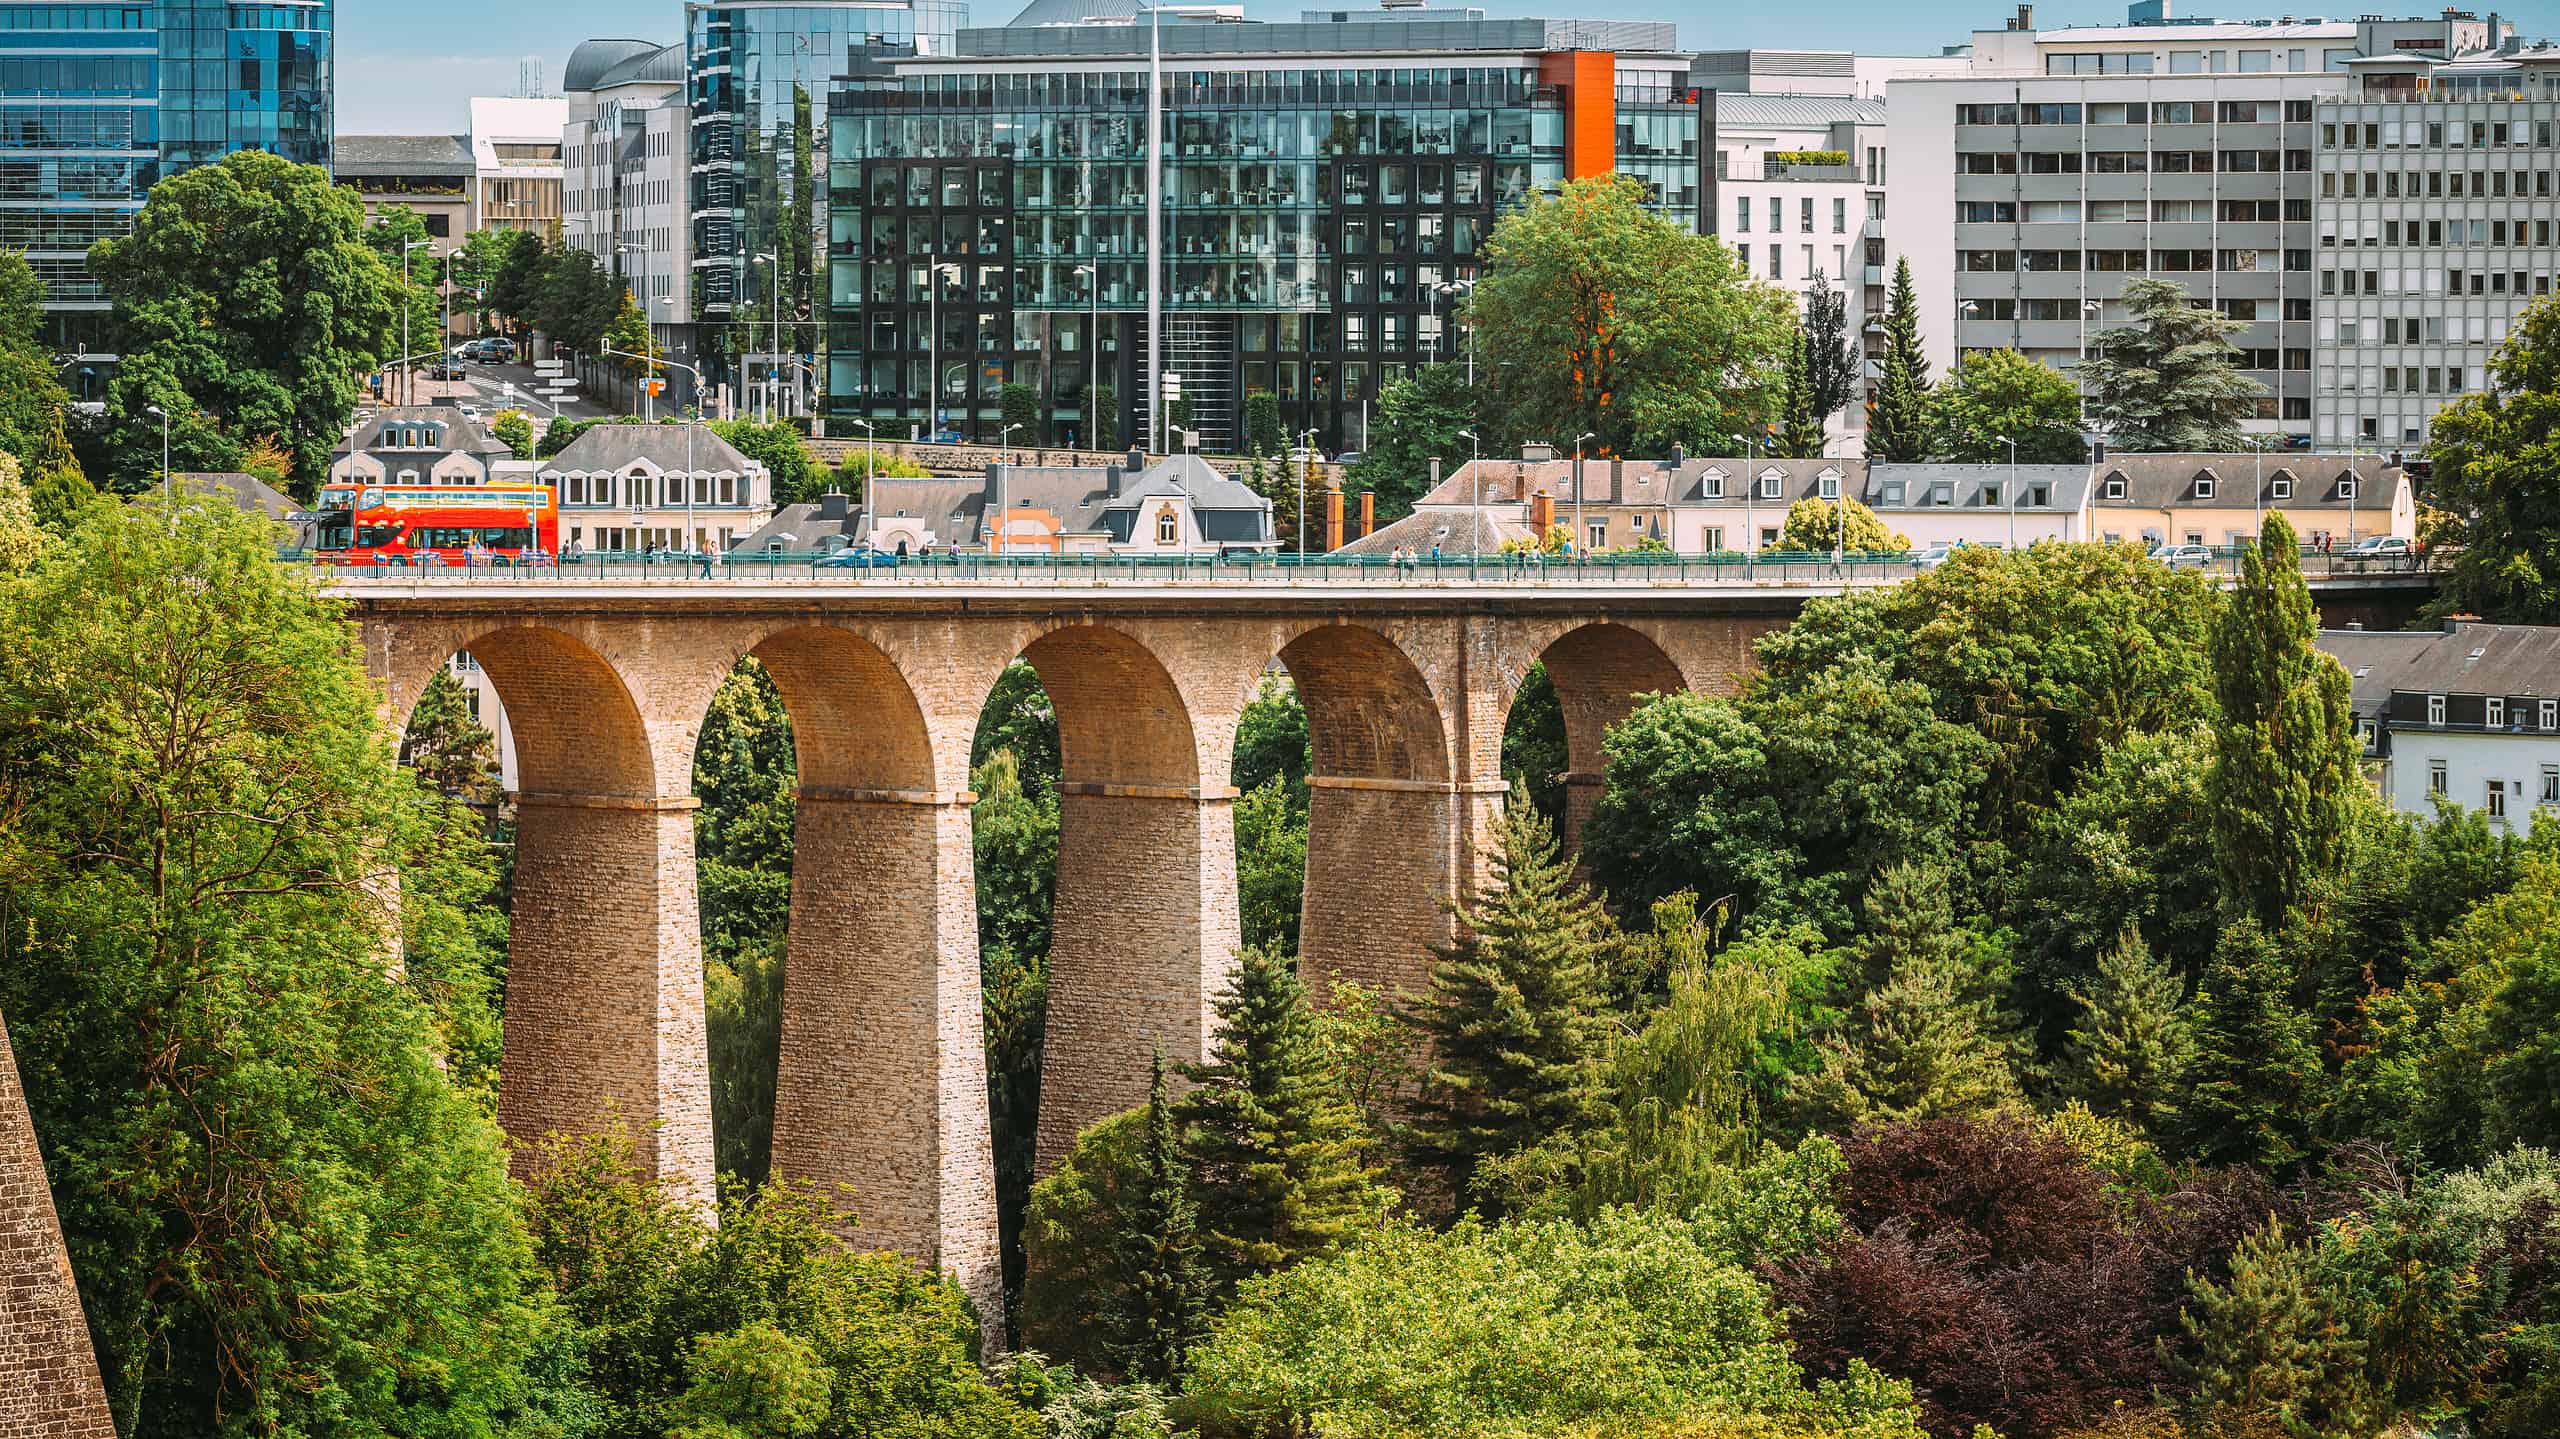 Luxembourg. Old Bridge - Passerelle Bridge Or Luxembourg Viaduct In Luxembourg.